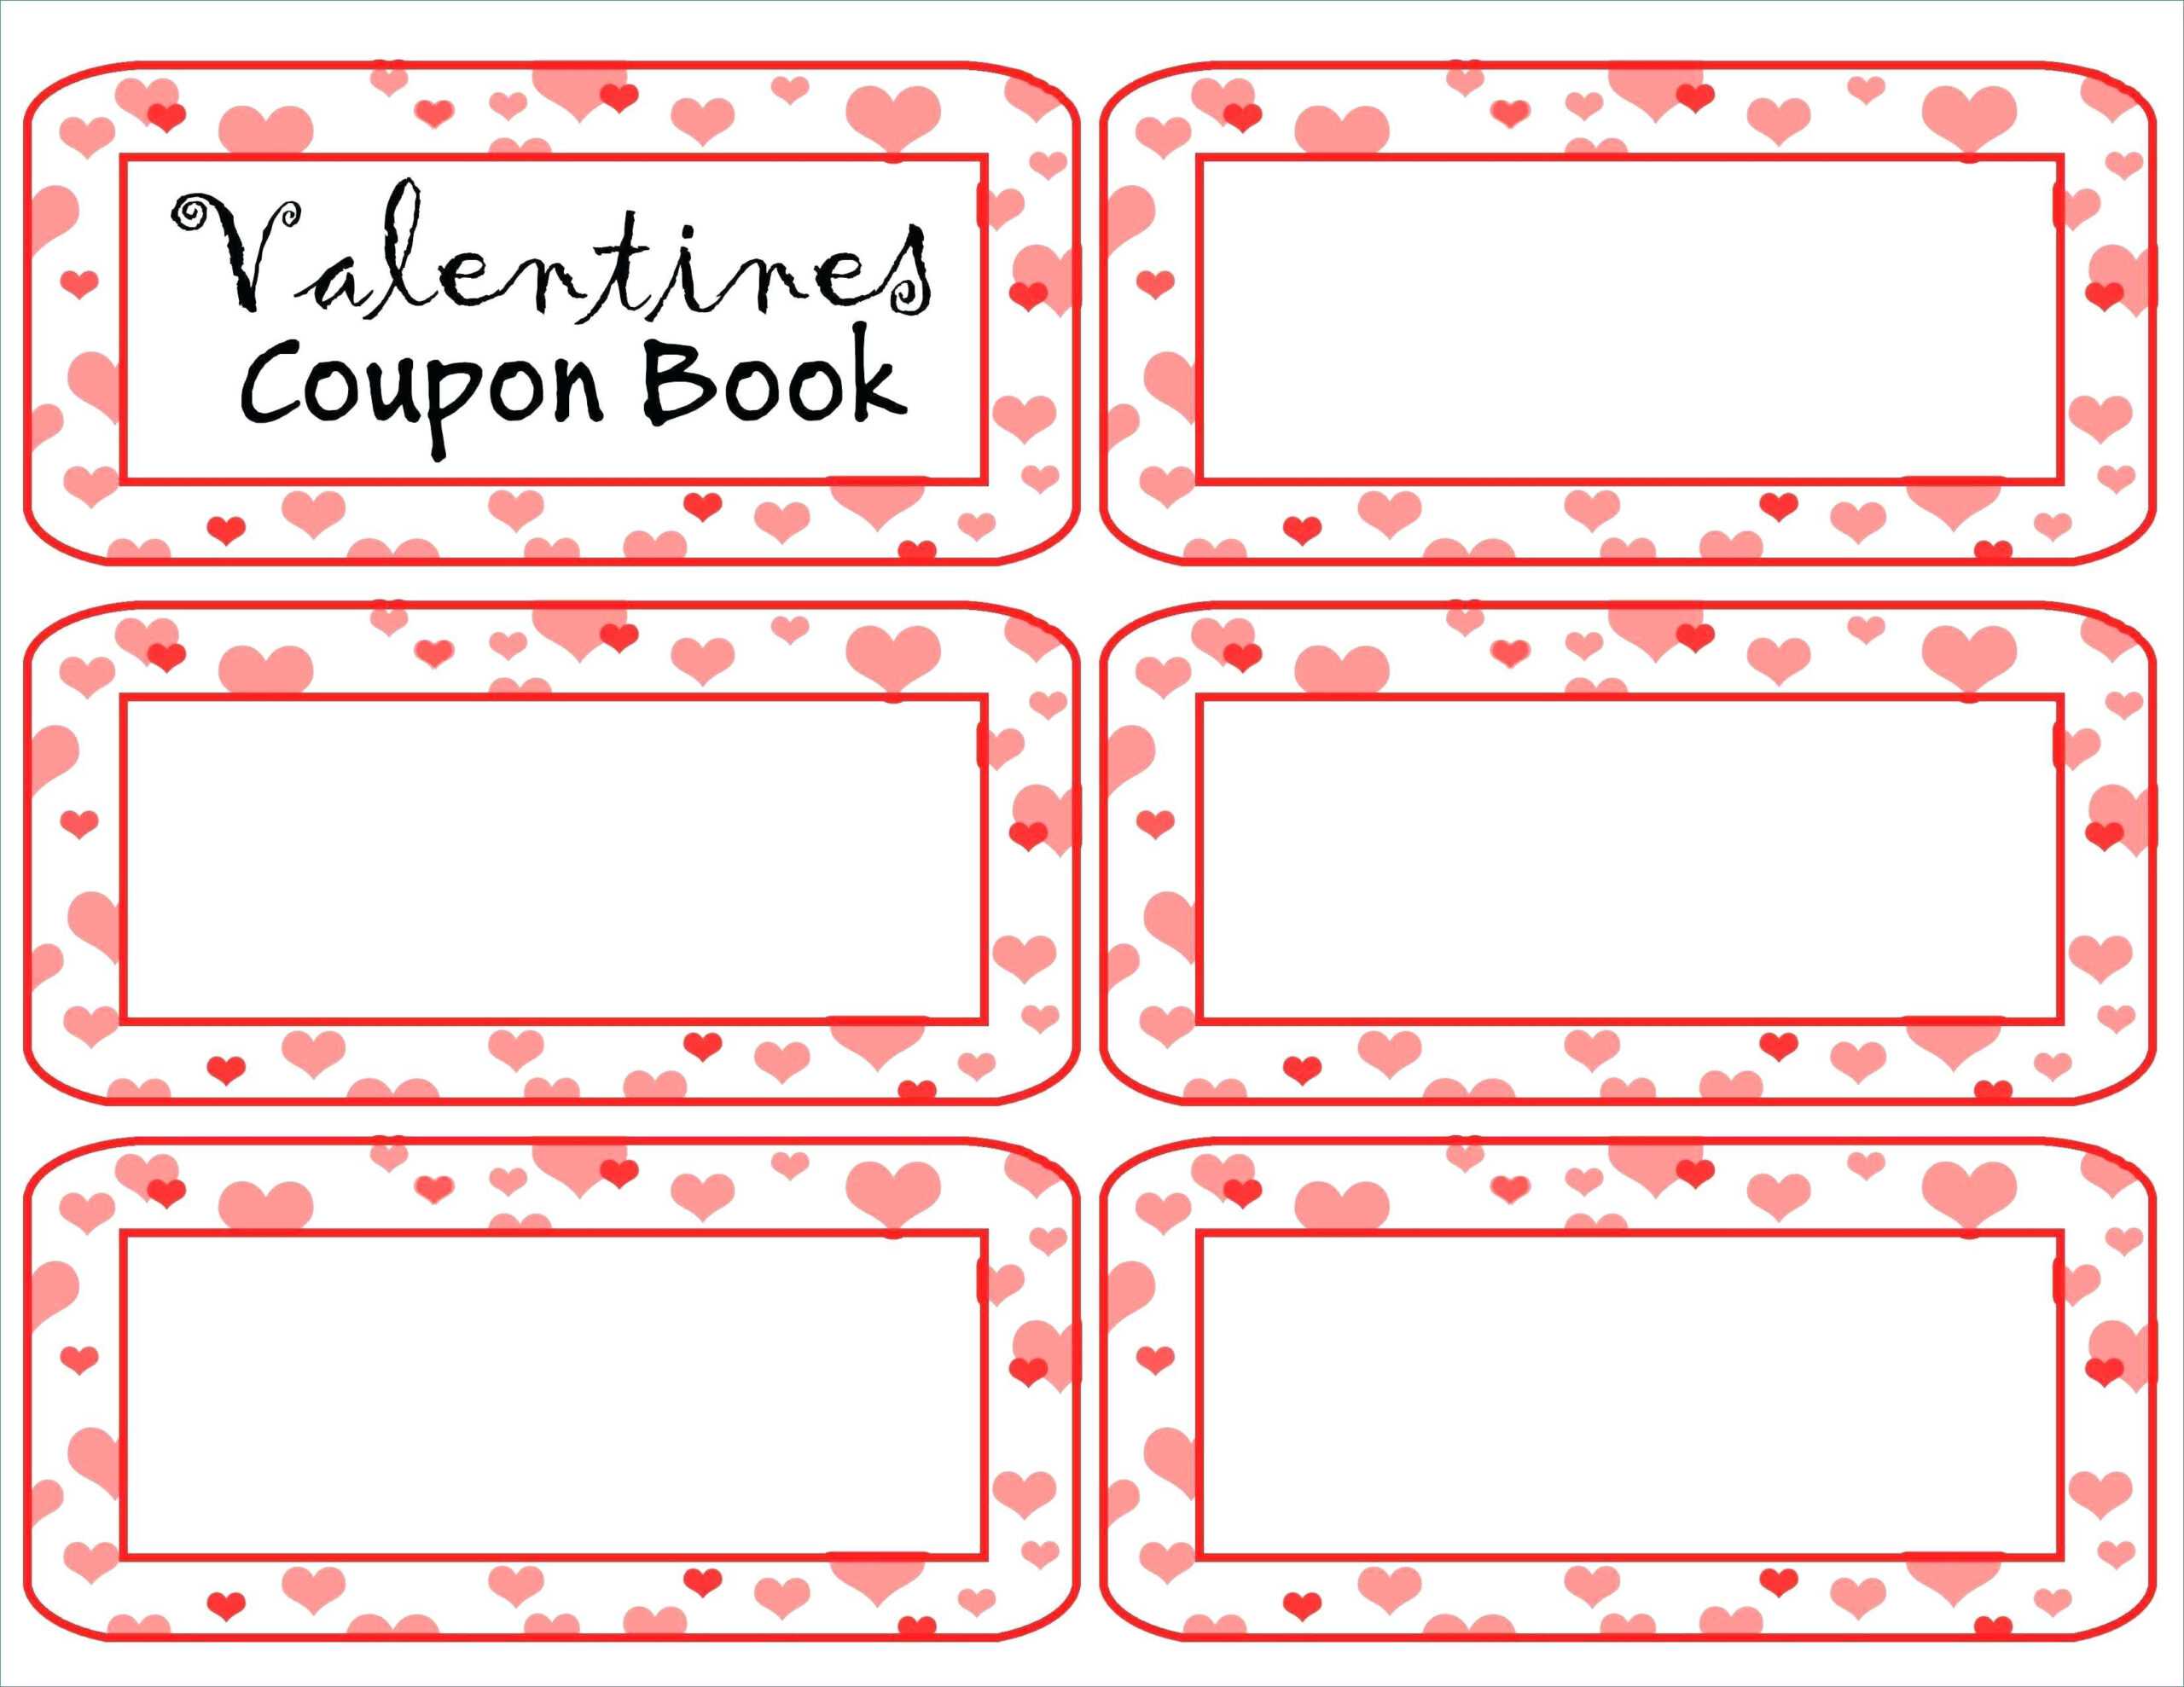 Blank Coupon Template Free Ideas Certificate Design Cool For Coupon Book Template Word